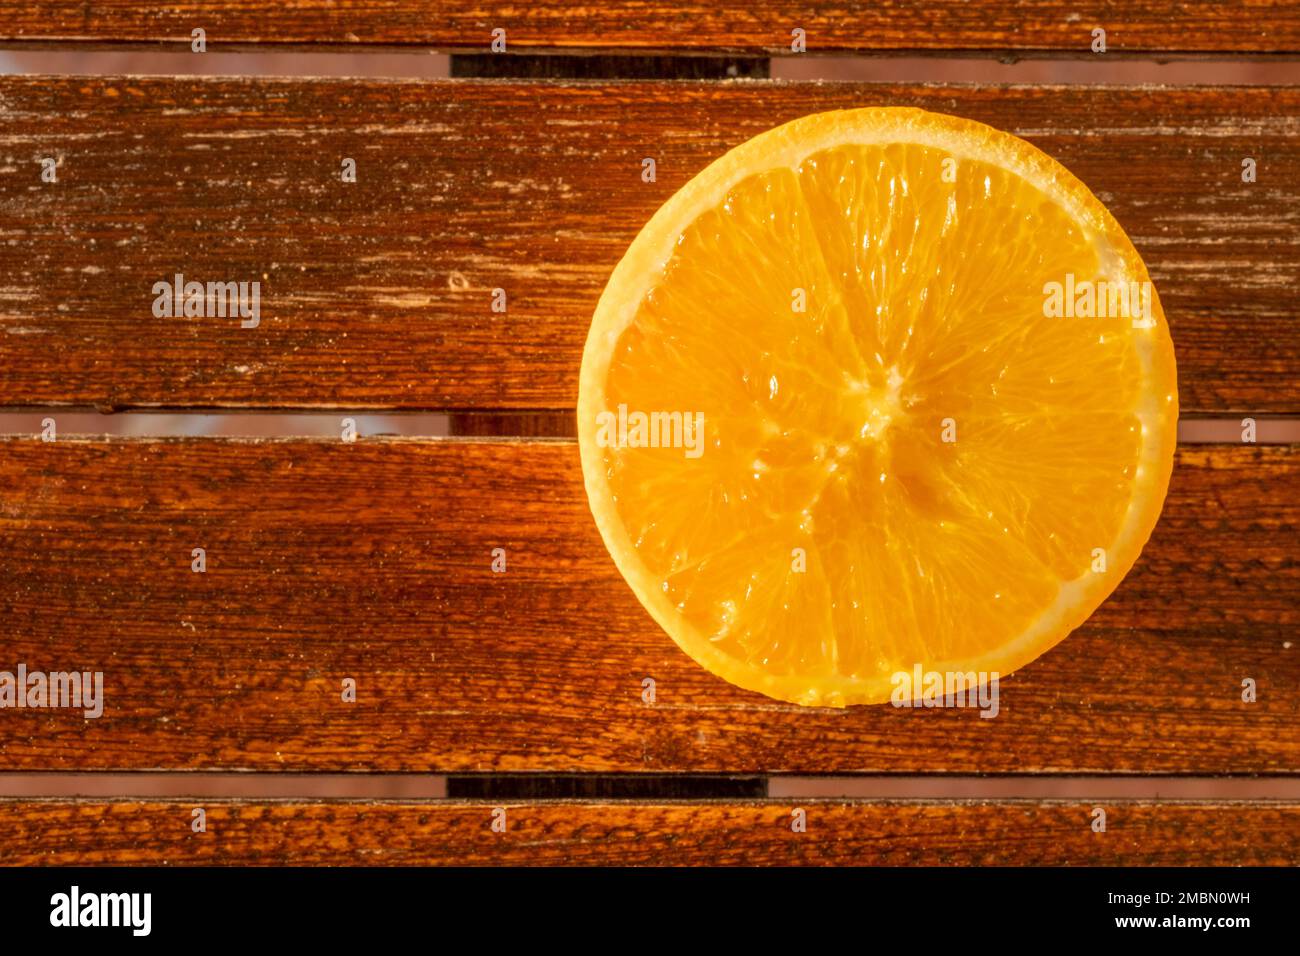 Circle pattern of a freshly cut yellow citrus fruit on wooden table at sun light. Top view on food background with copy space. Stock Photo